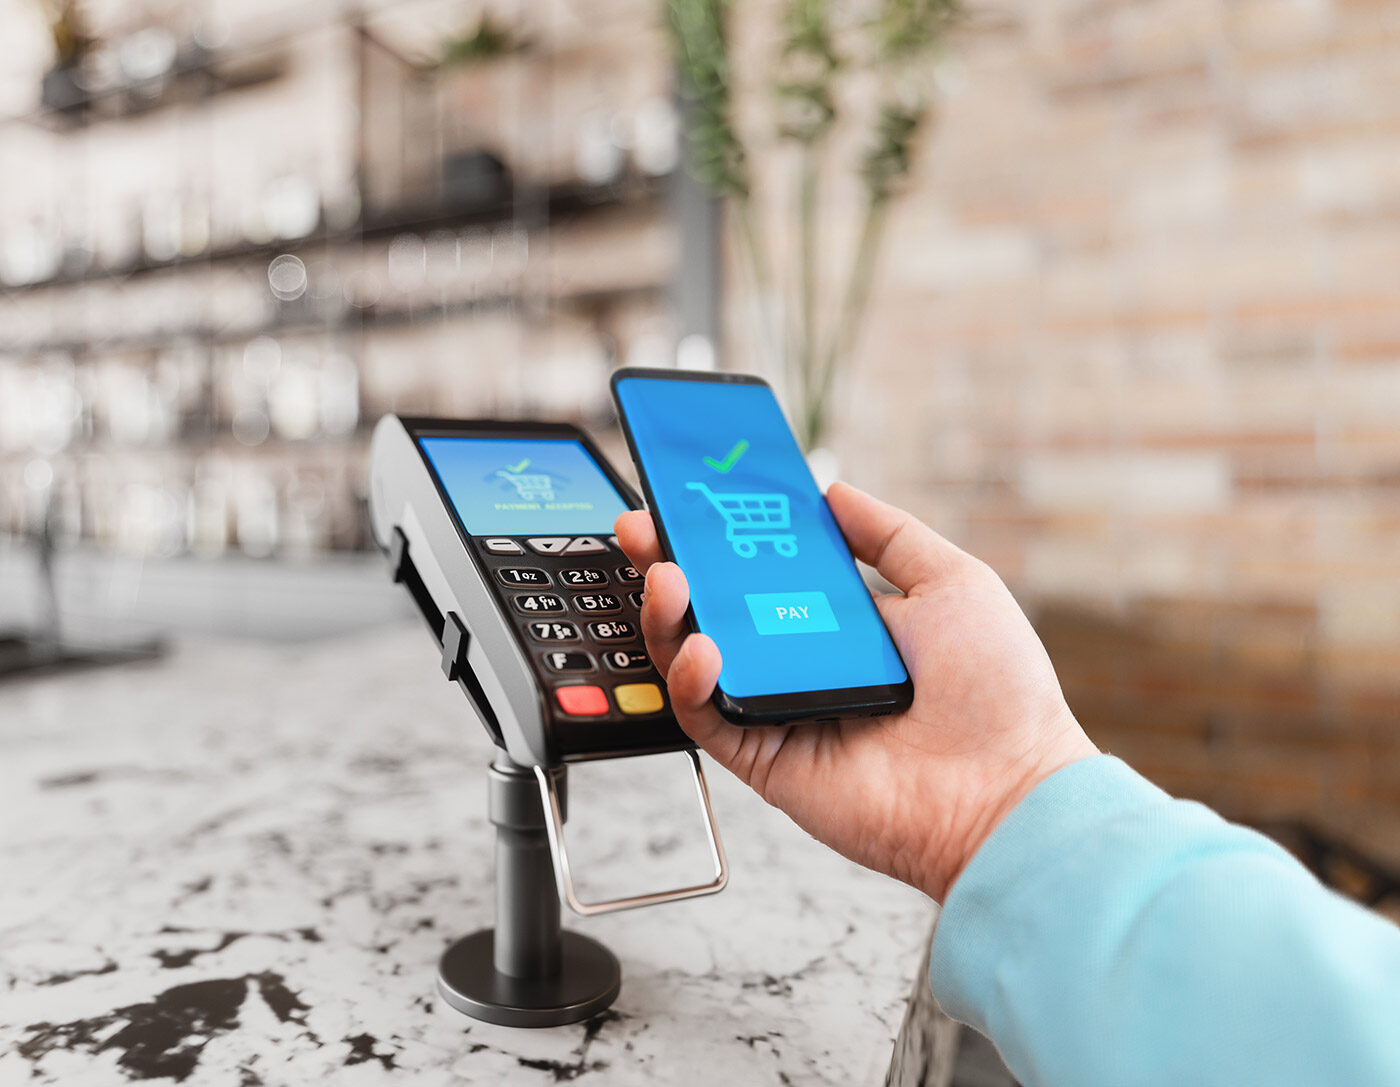 Contactless payment via smartphone, valantic and the ISO 20022-migration